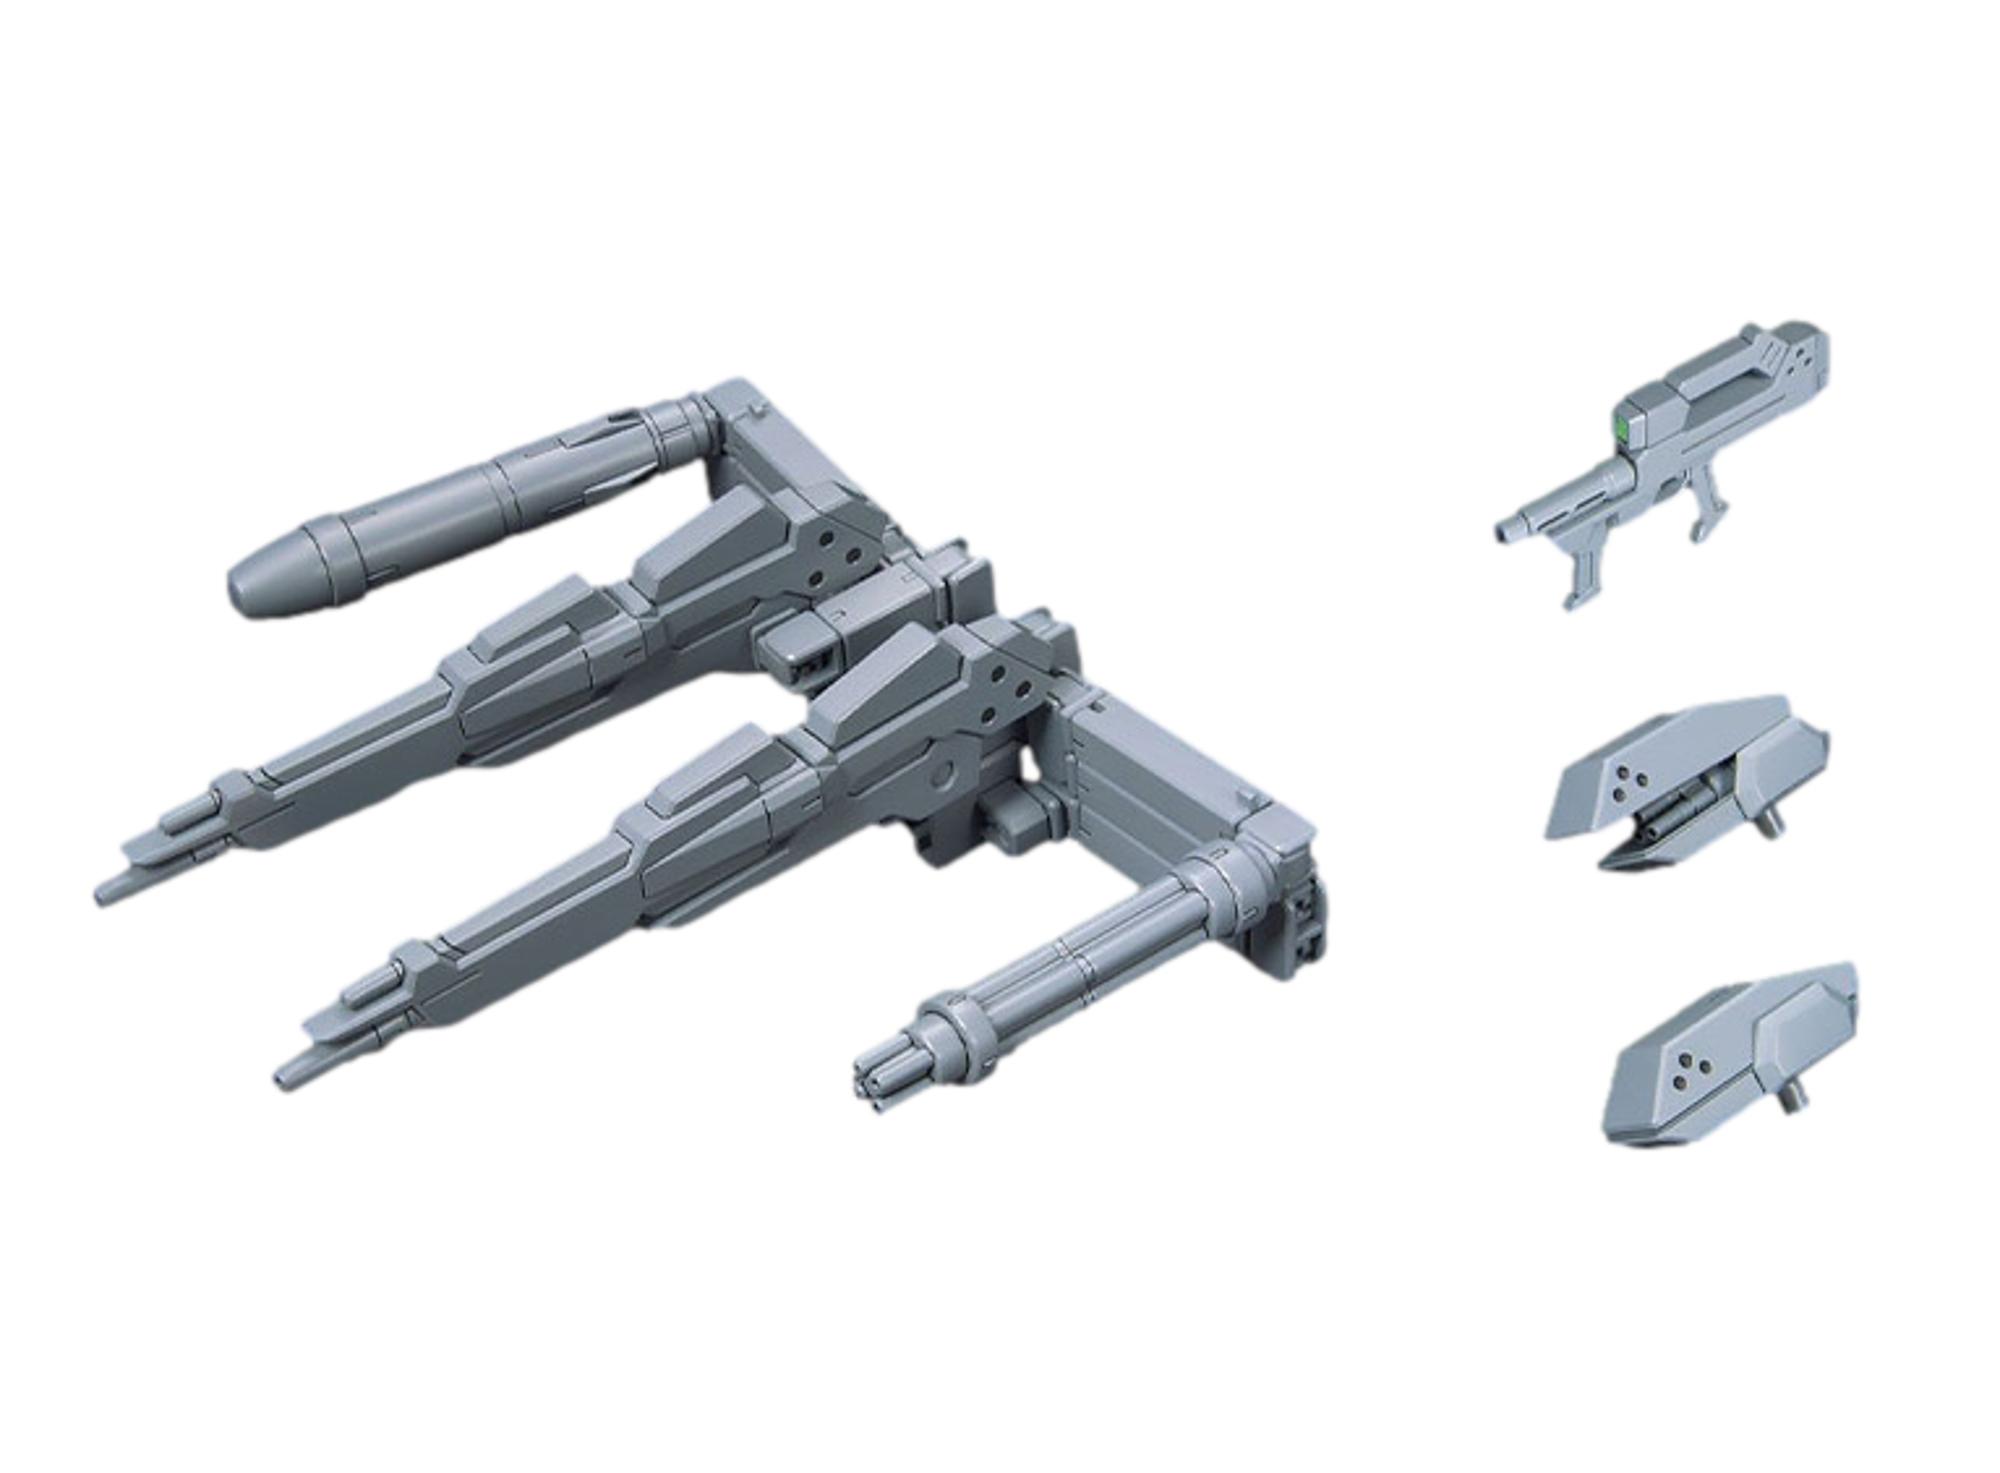 Bandai 1/144 Builders Parts HD Powered Arms Powereder (Build Fighters Support Weapon)